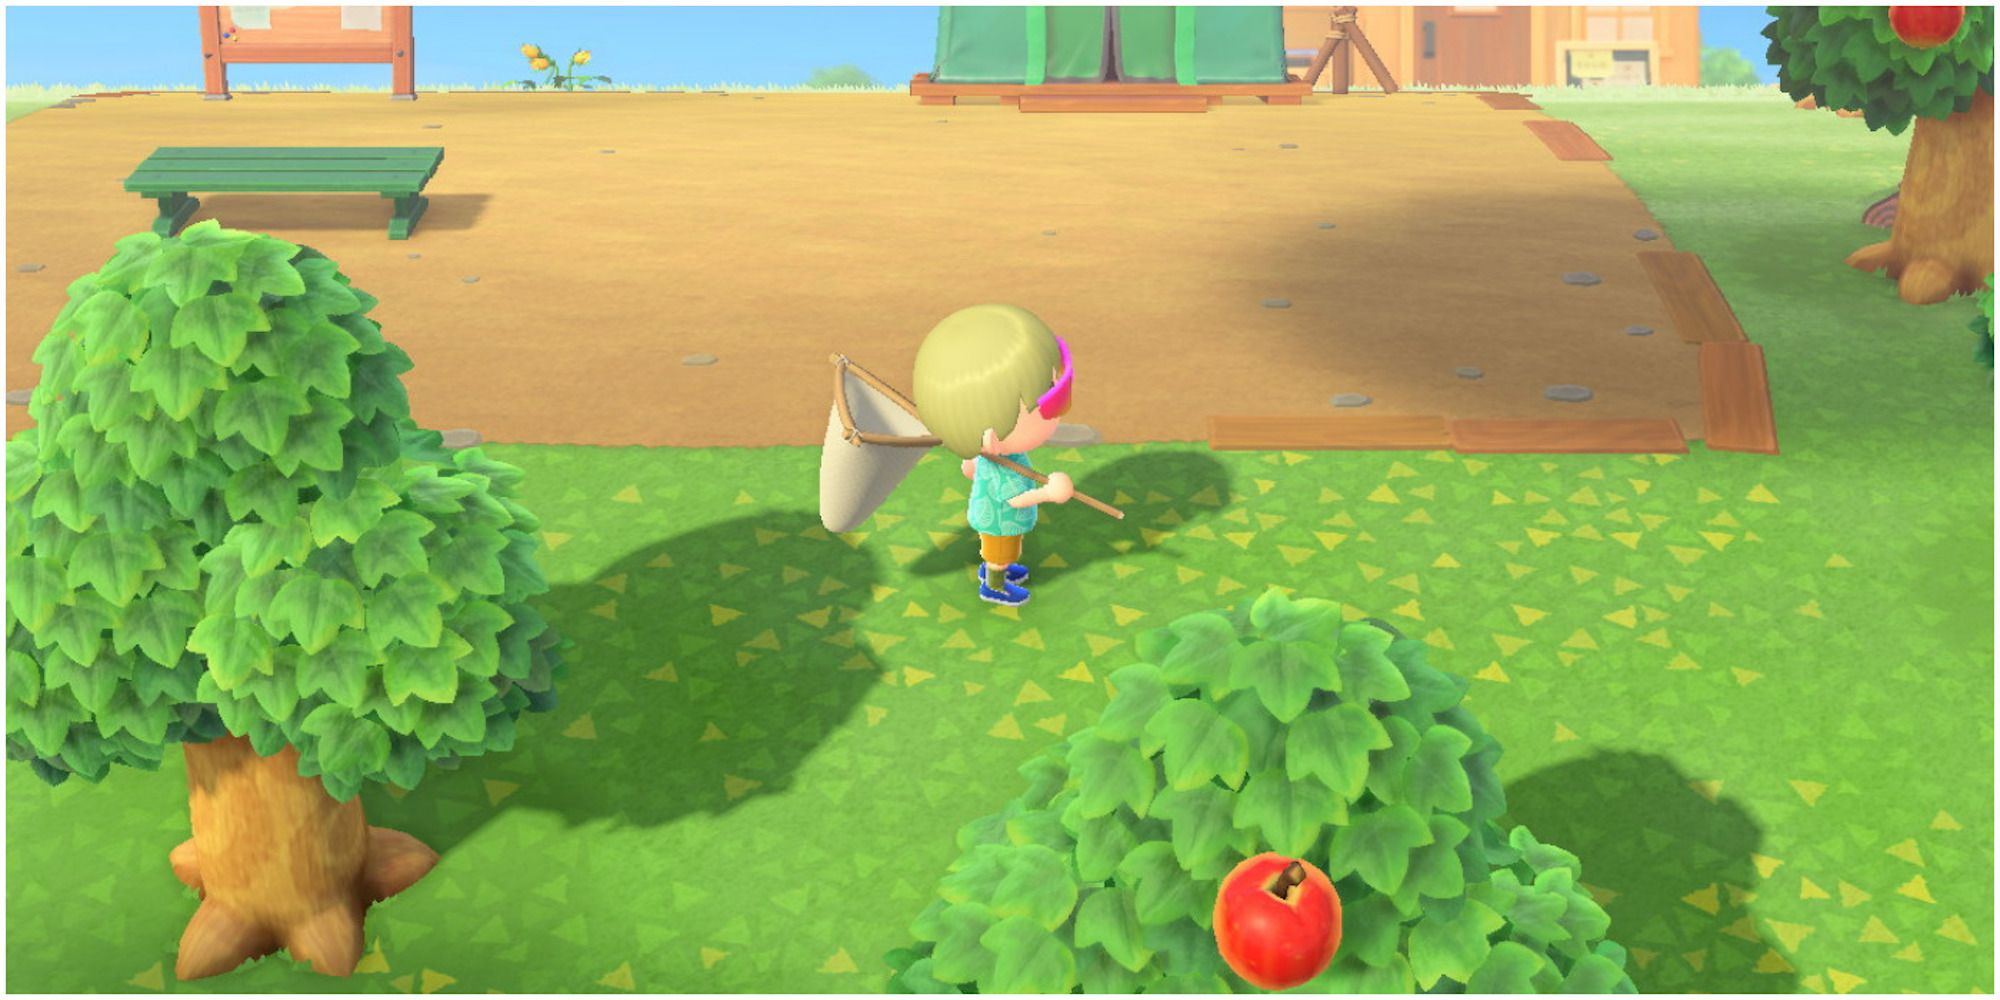 Exploring the world in Animal Crossing: New Horizons 